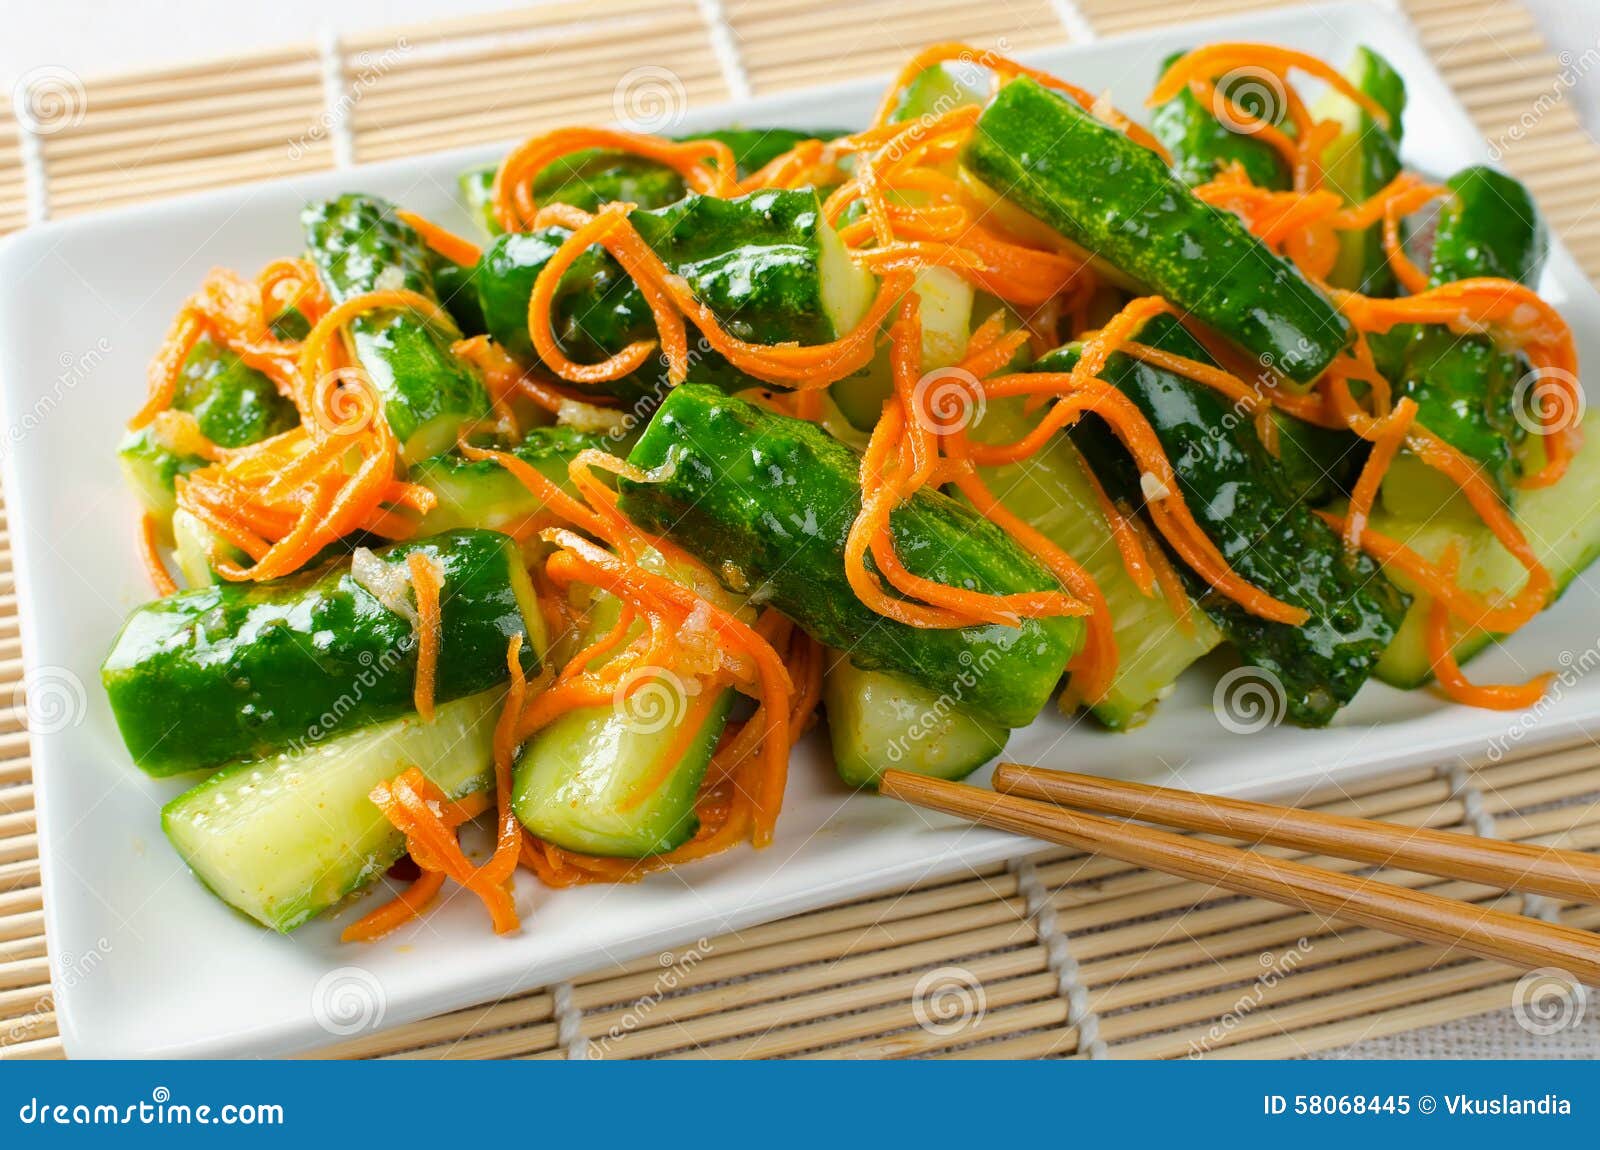 Cucumber Salad with Carrots Stock Image - Image of pepper, meal: 58068445